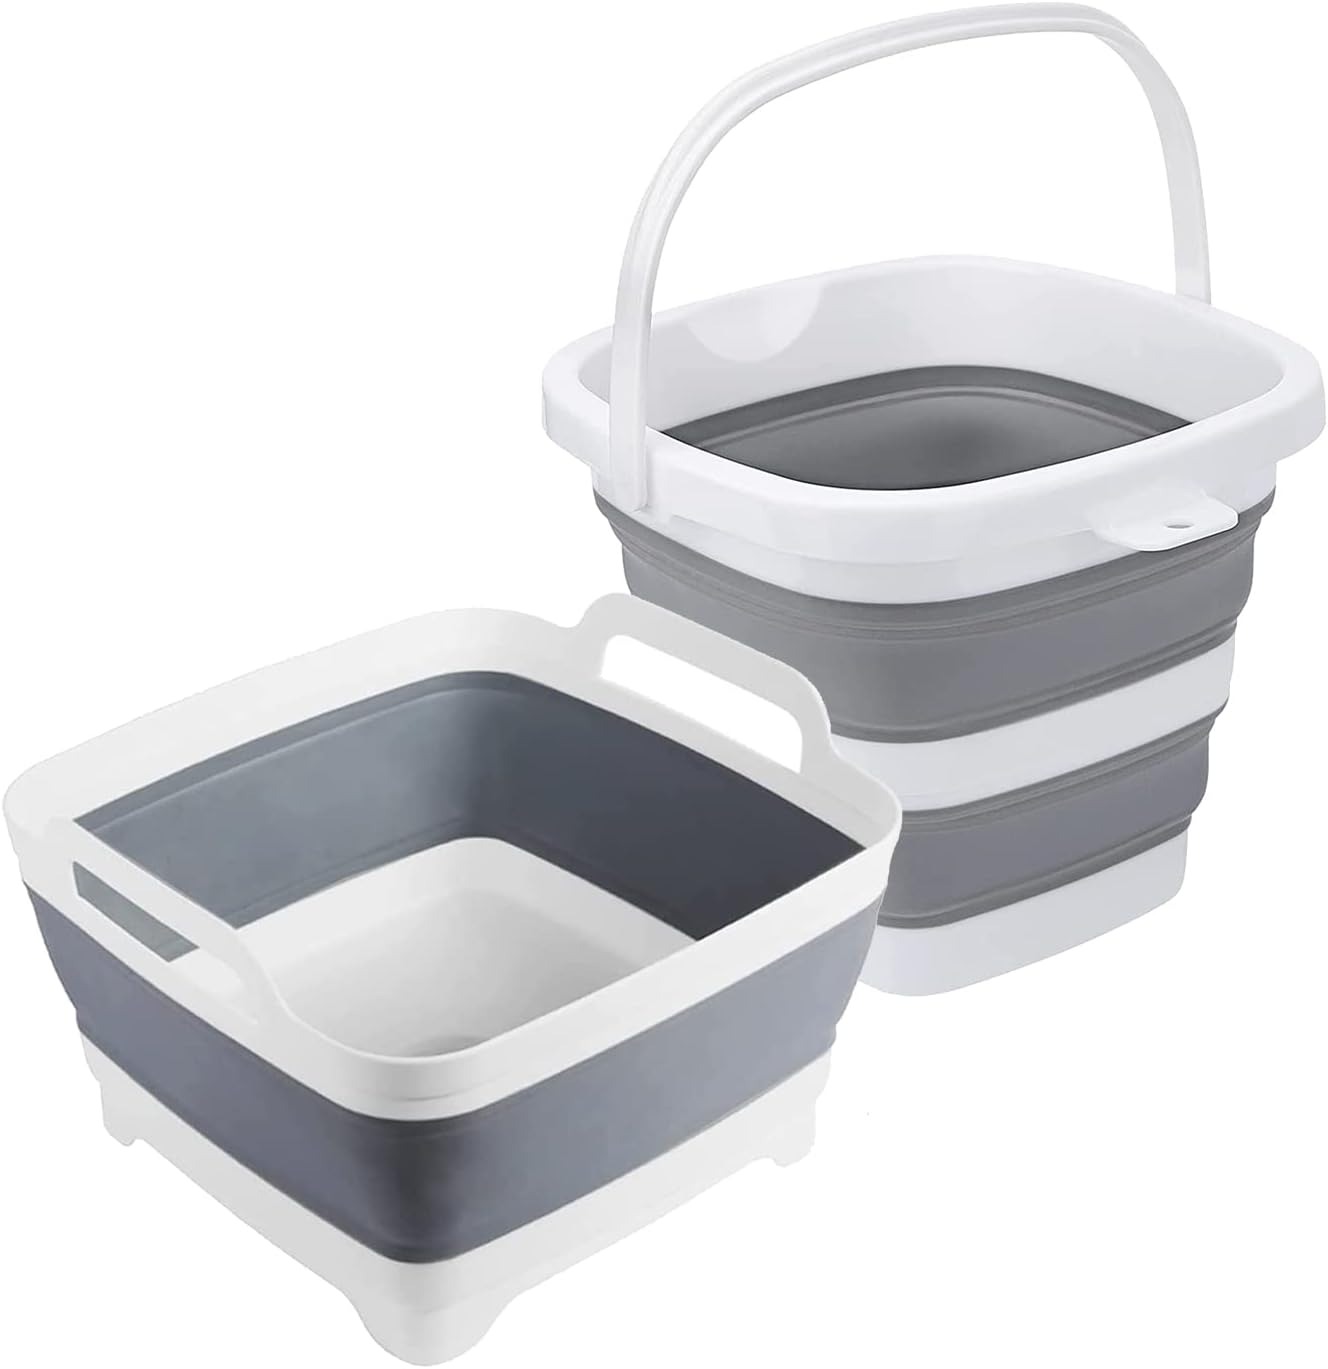 MontNorth Dishpan For Washing Dishes,9L Collapsible and Portable,Wash Dish Basin,Foldable Laundry Tub with Drain Plug for Kitchen Sink,Camping,Gray